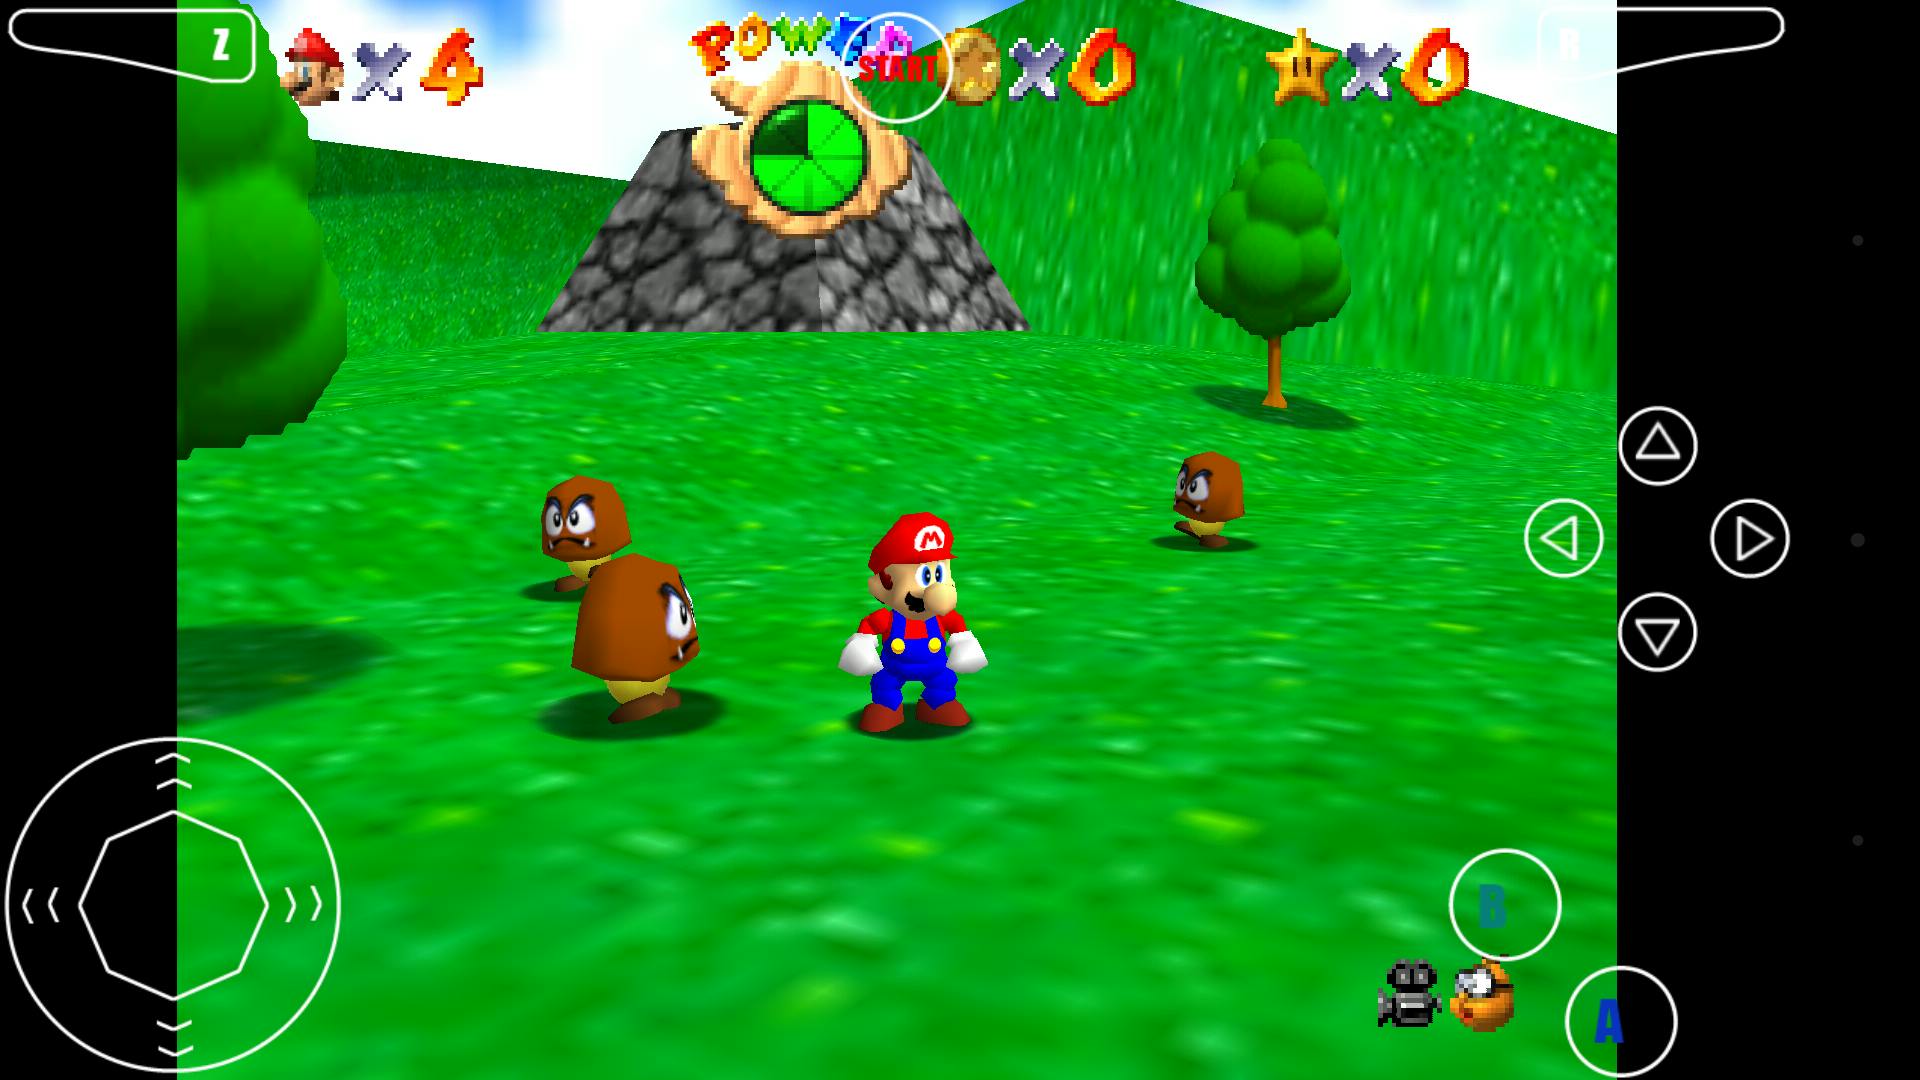 "Super Mario 64" emulated by Mupen64